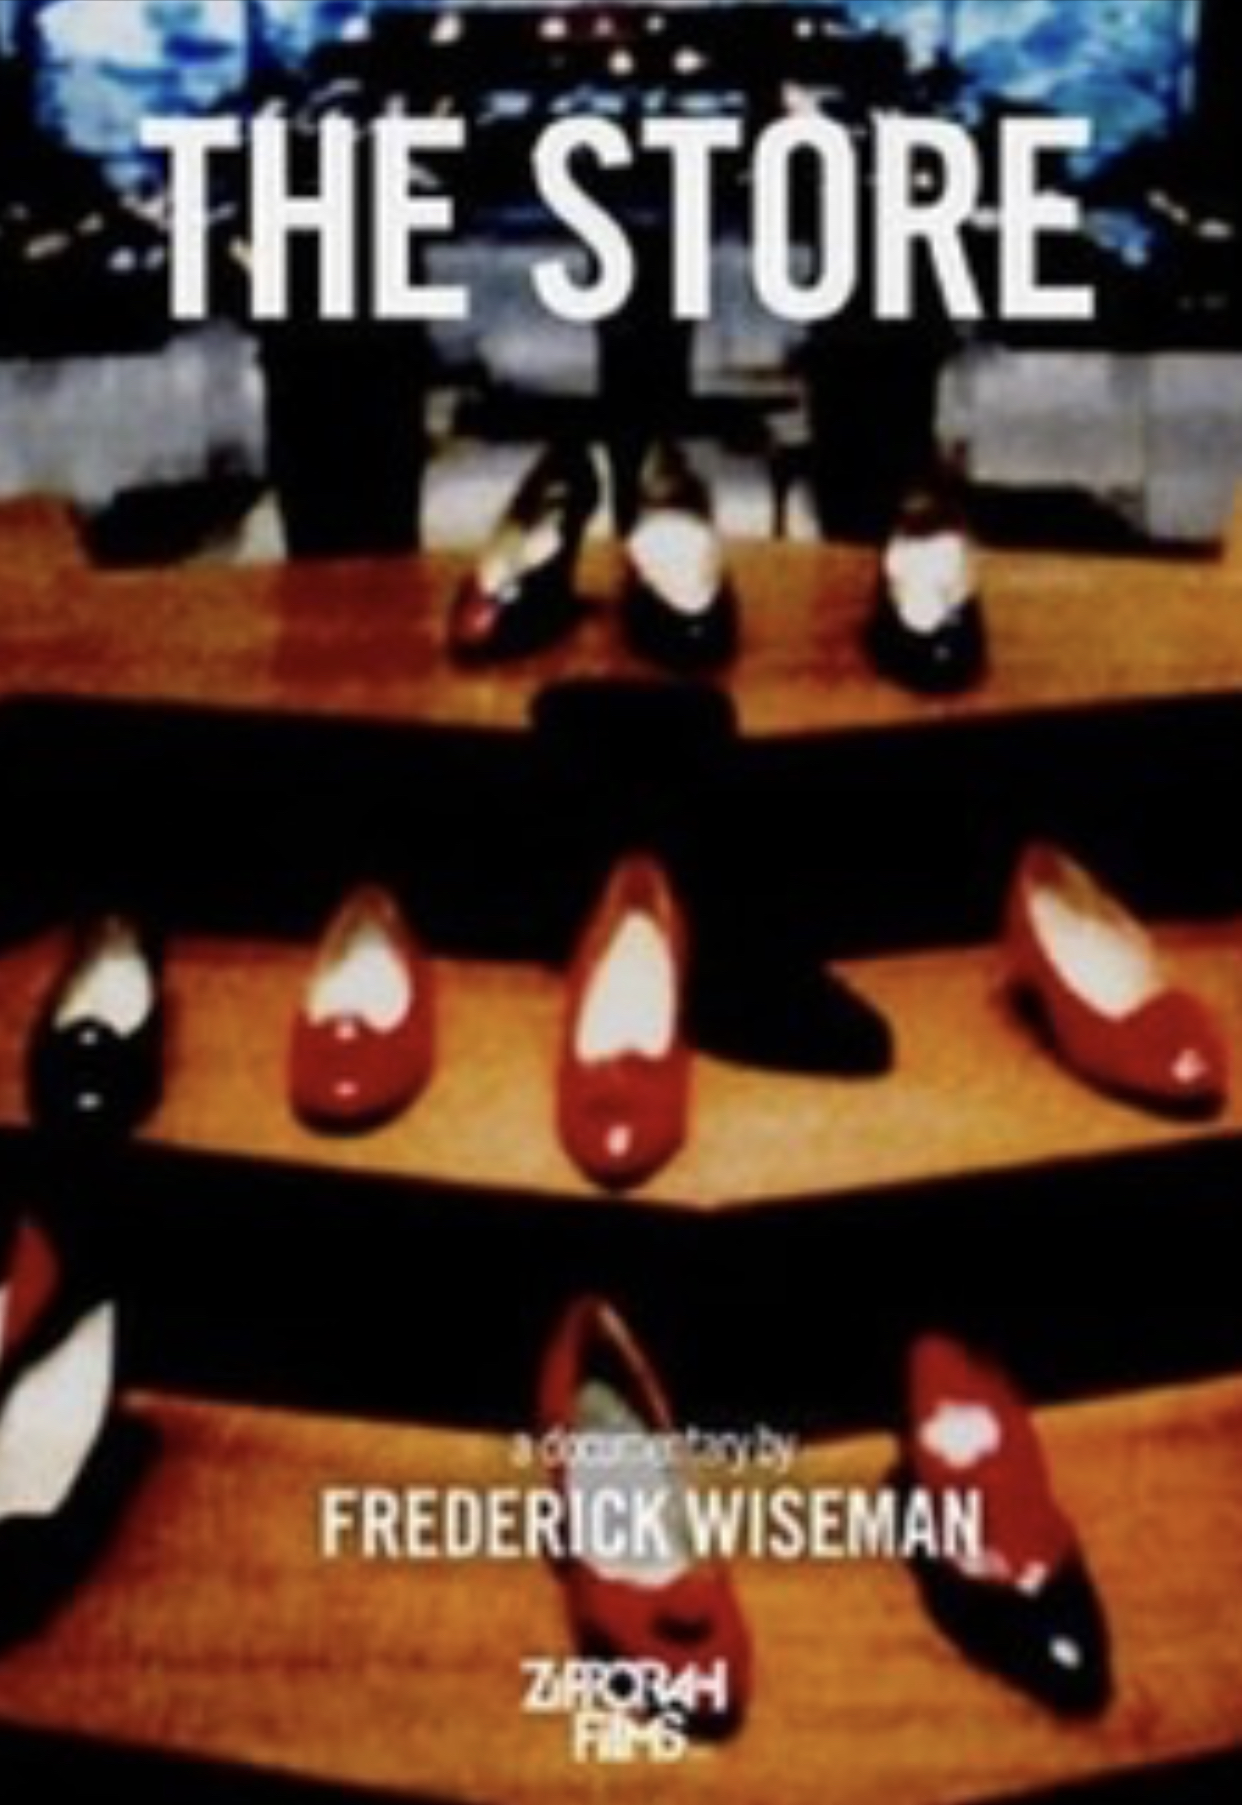 The Store (1984) starring N/A on DVD on DVD